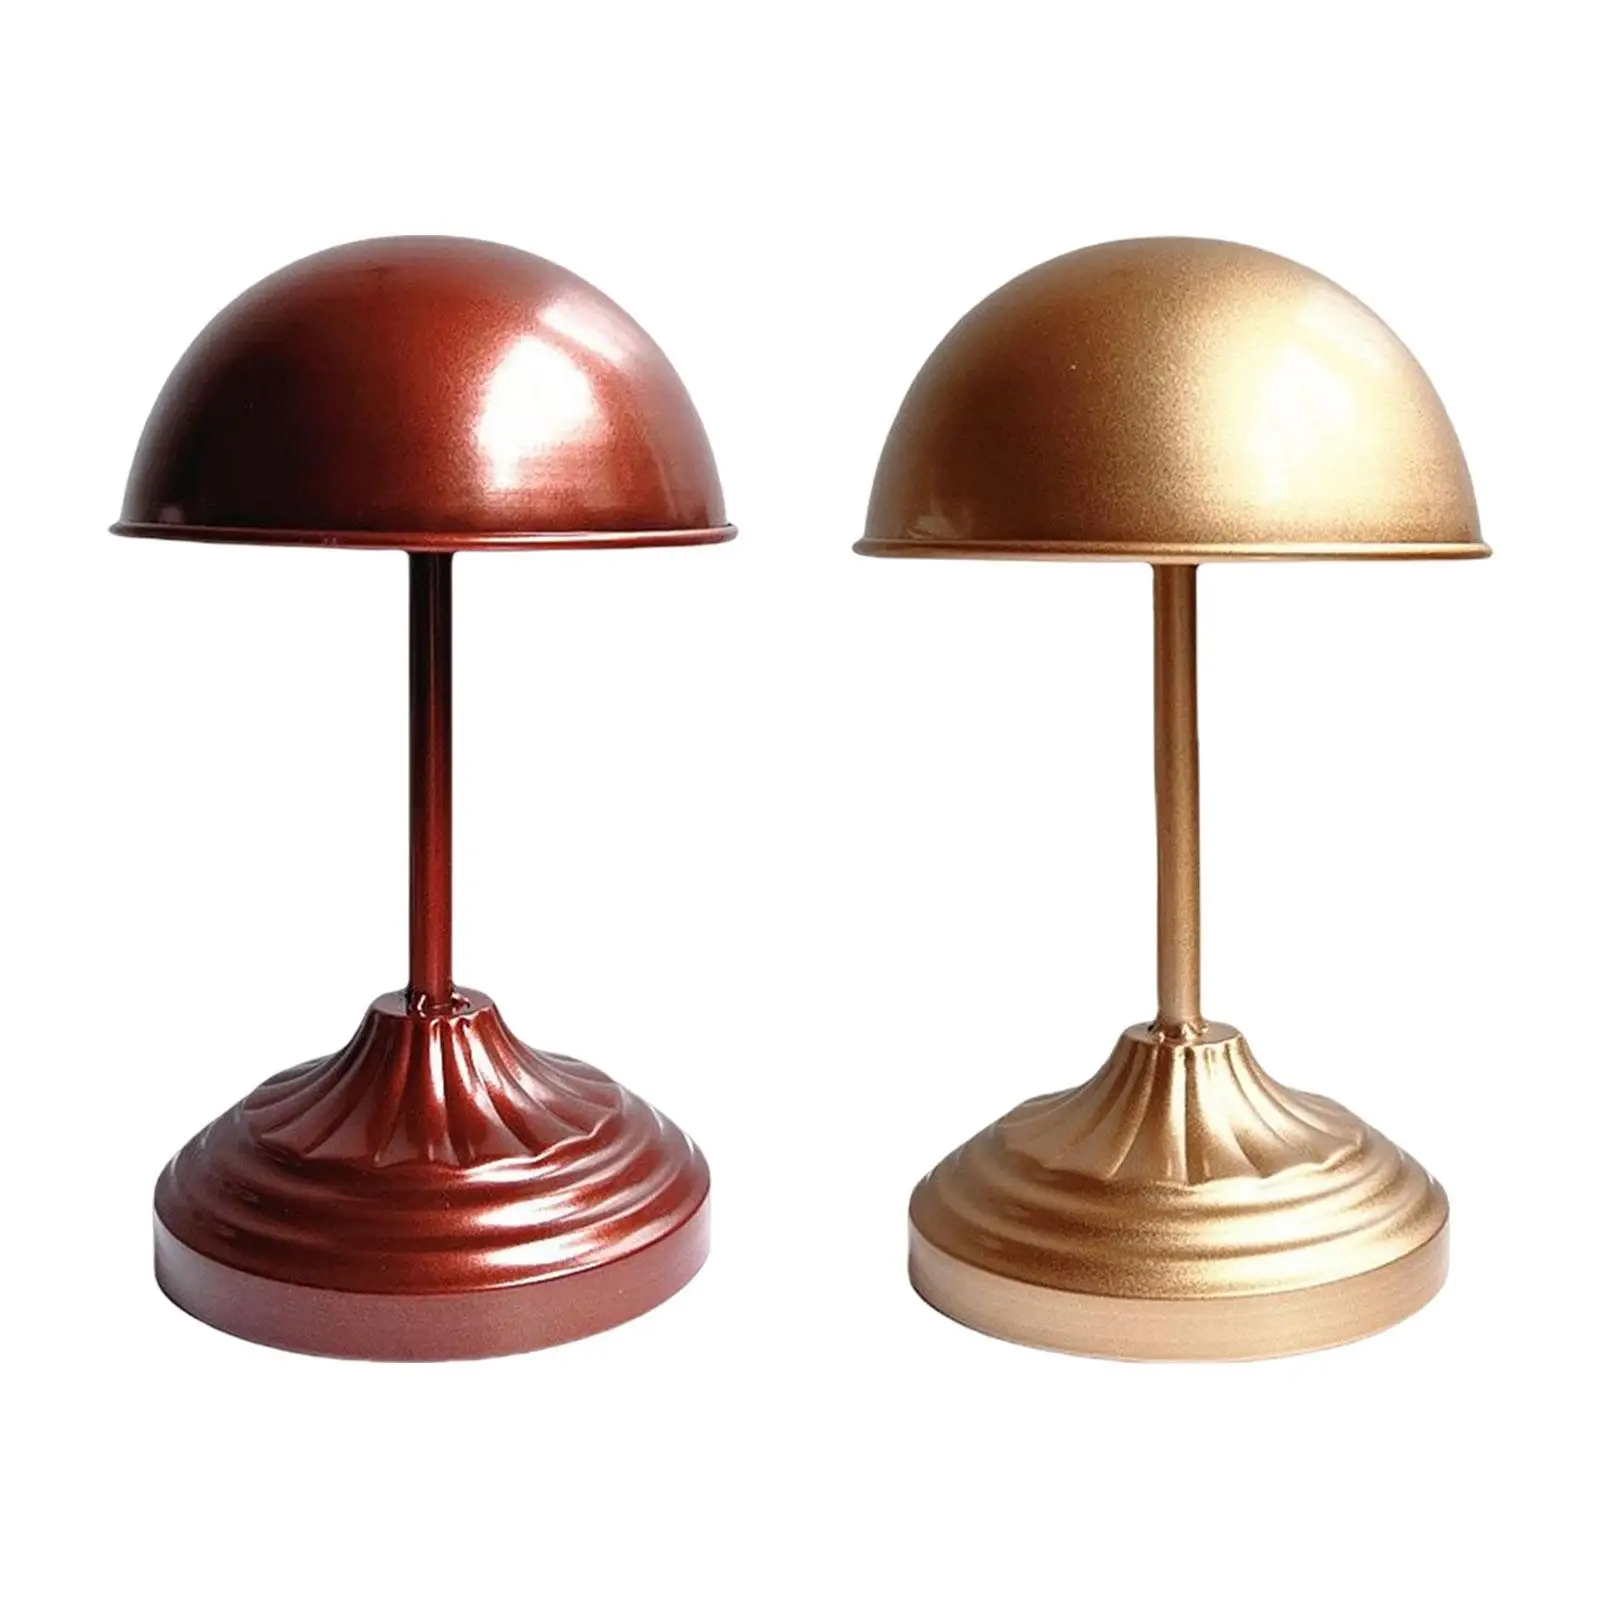 Hat Display Stand Sturdy Dome Shape Vintage Stable Base Freestanding Metal Wig Stand Holder for Shop Tabletop Styling